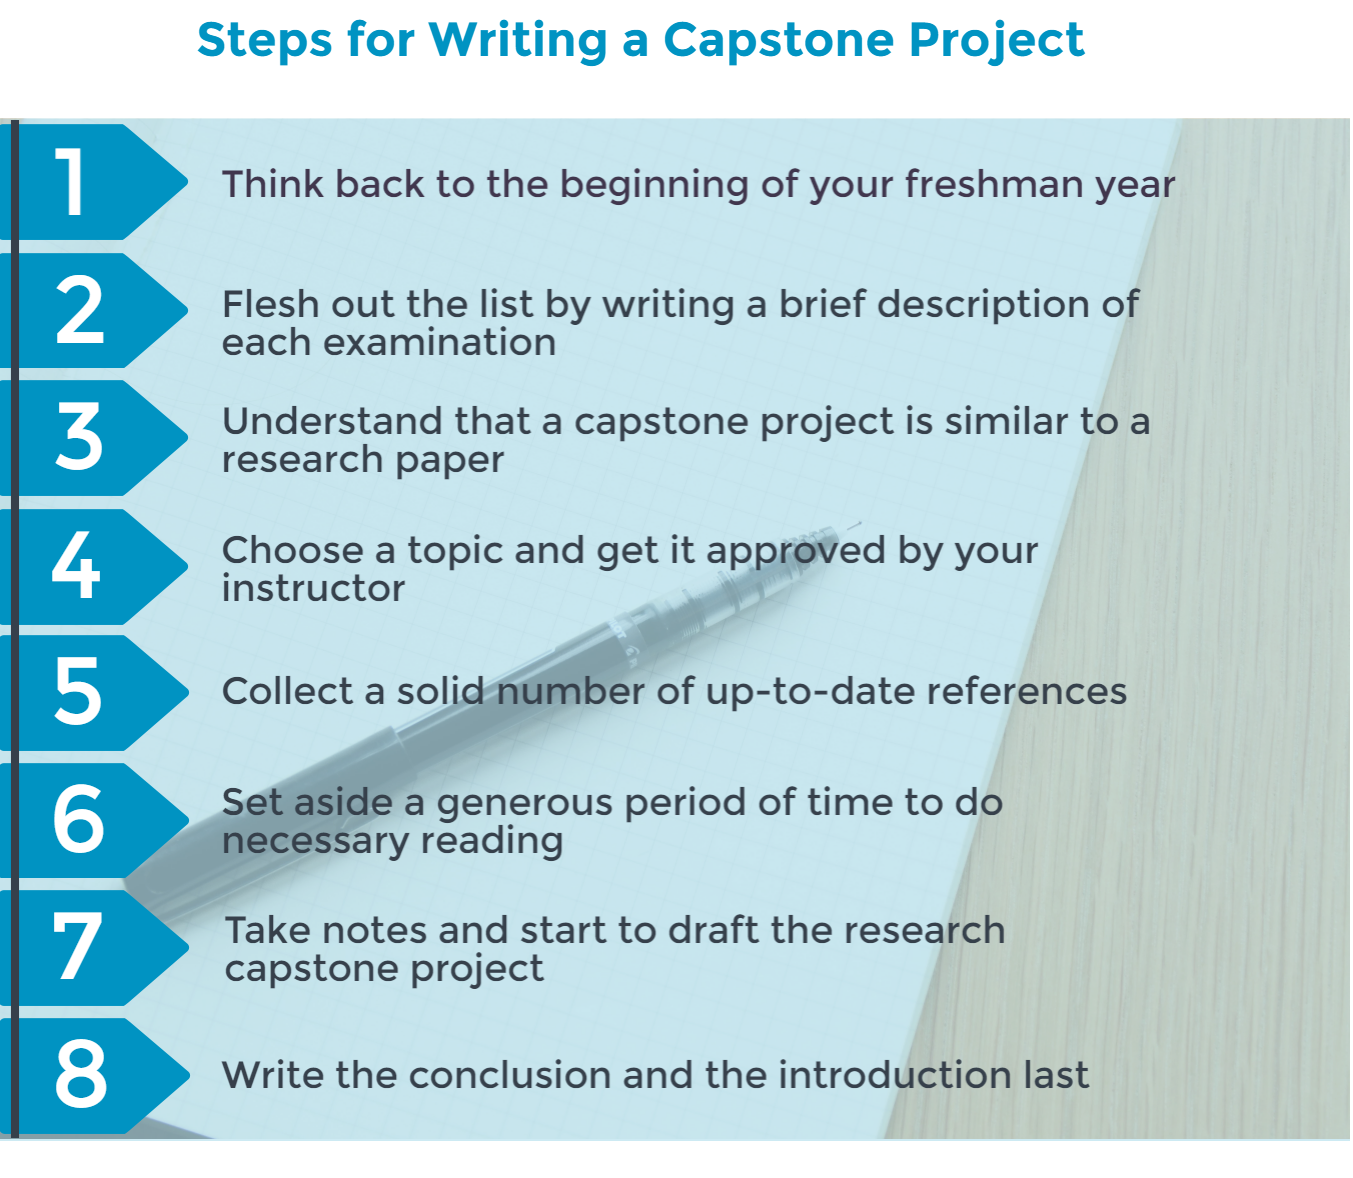 Capstone Project Proposal Format Guide to Write Good Capstone